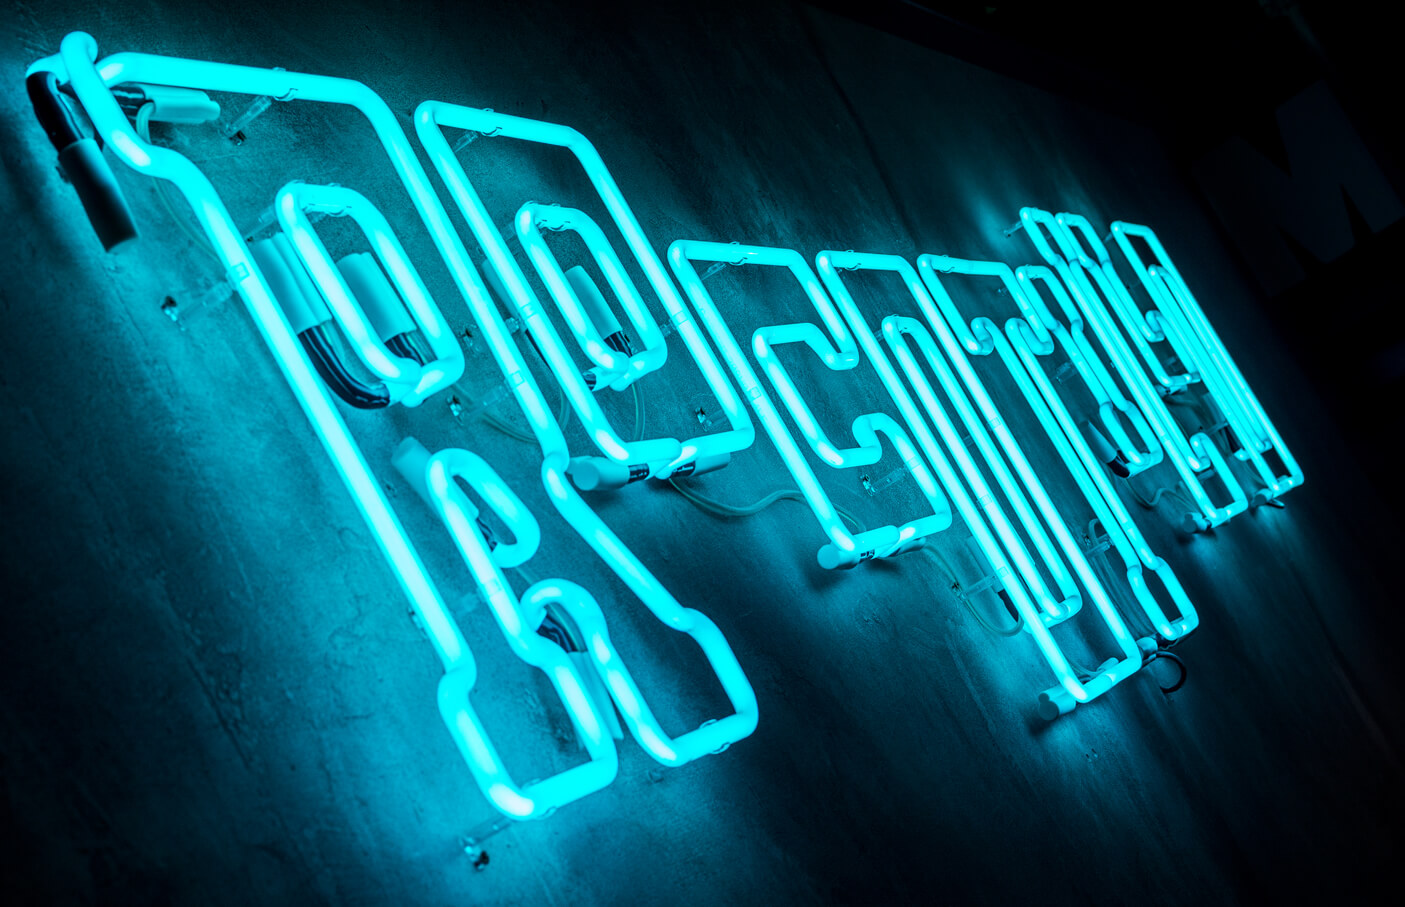 Rocotilli - neon-rocotillo-neon-on-the-wall-interior-restaurant-neon-mounted-to-the-wall-neon-over-tables-neon-illuminated-neon-on-the-wall-concrete-neon-glass-neon-logo-sign